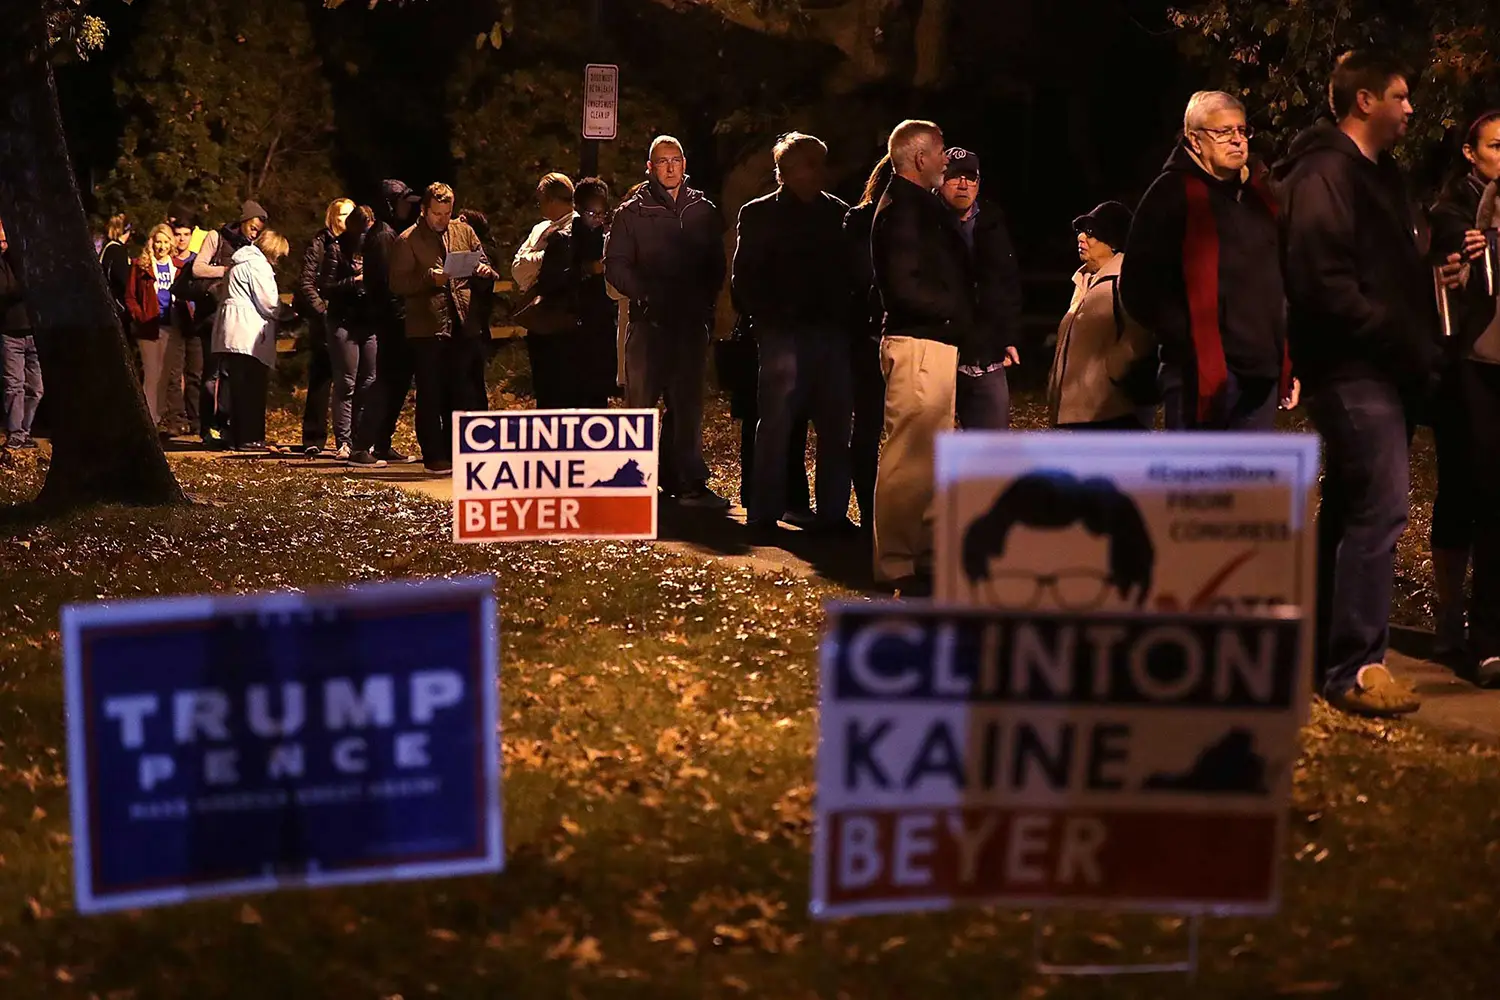 A line of voters standing behind Hilary Clinton and Donald Trump placards.